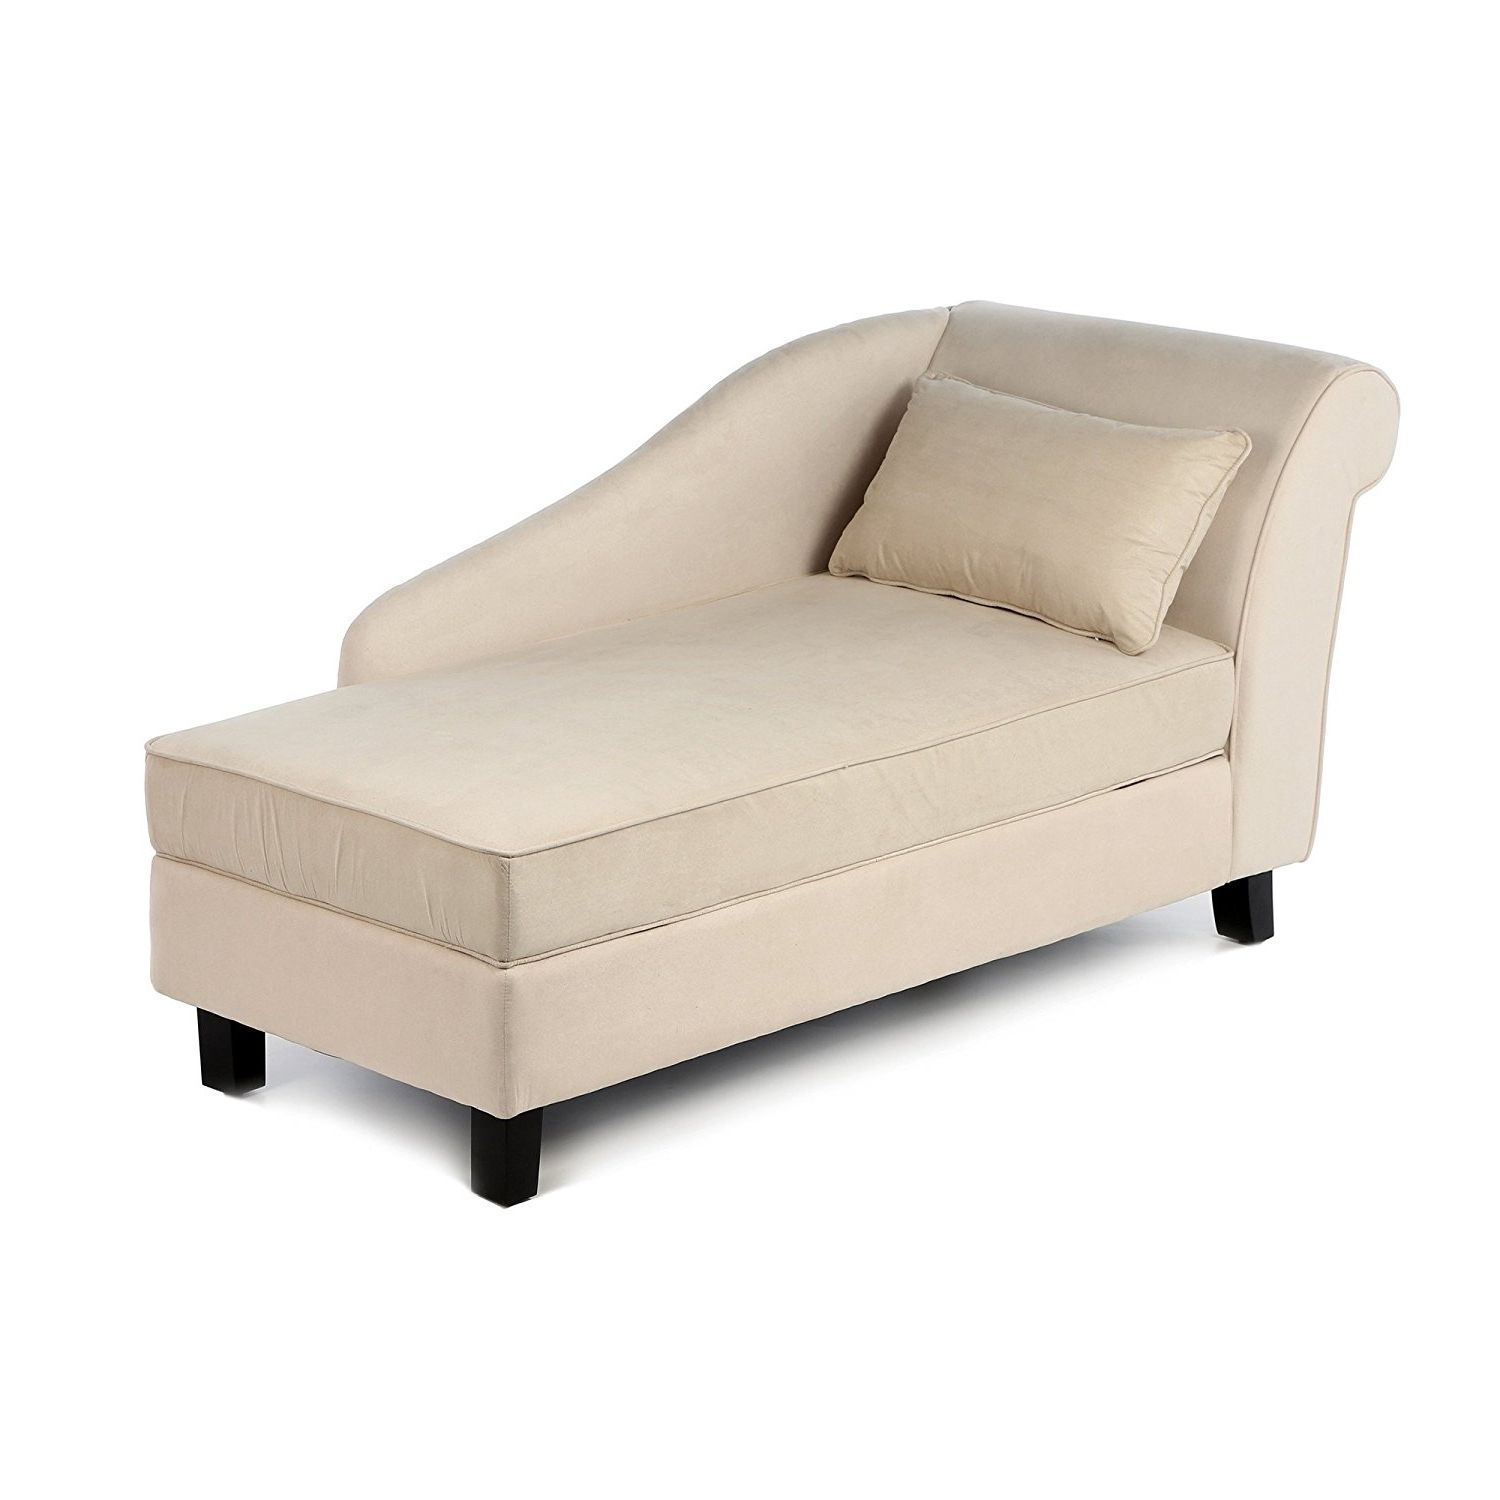 Most Recent Amazon: Castleton Home Storage Chaise Lounge Modern Long Chair With Regard To Sofa Lounge Chairs (View 13 of 15)